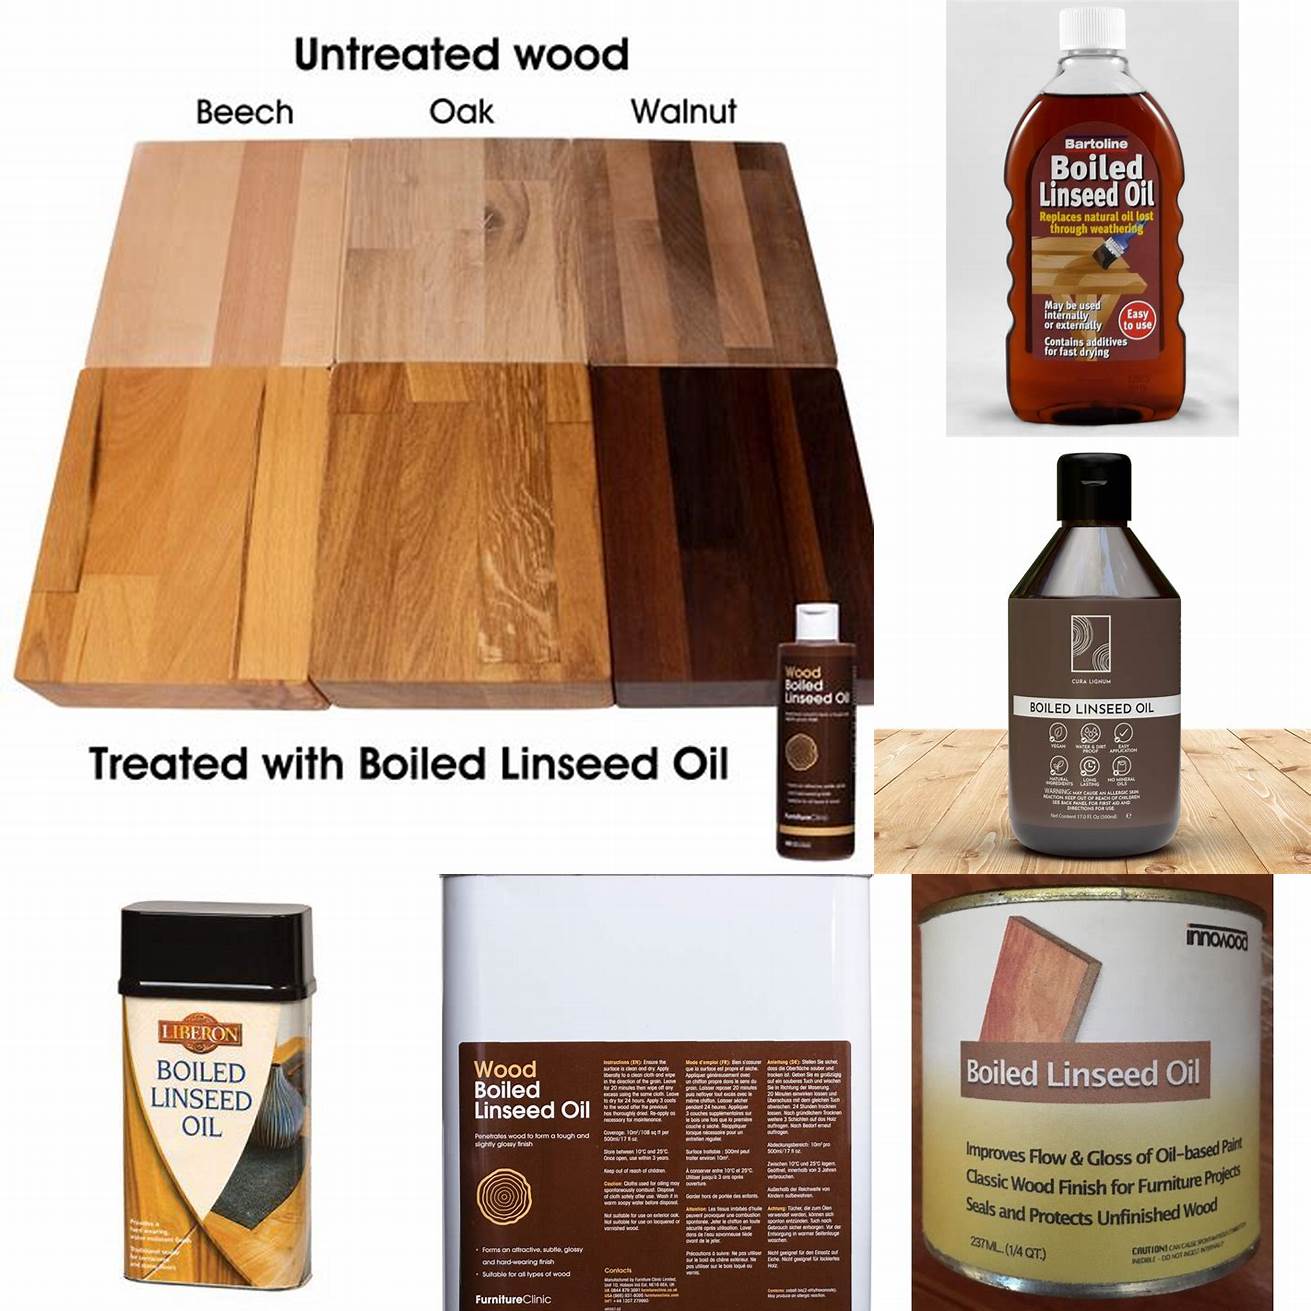 Quality linseed oil